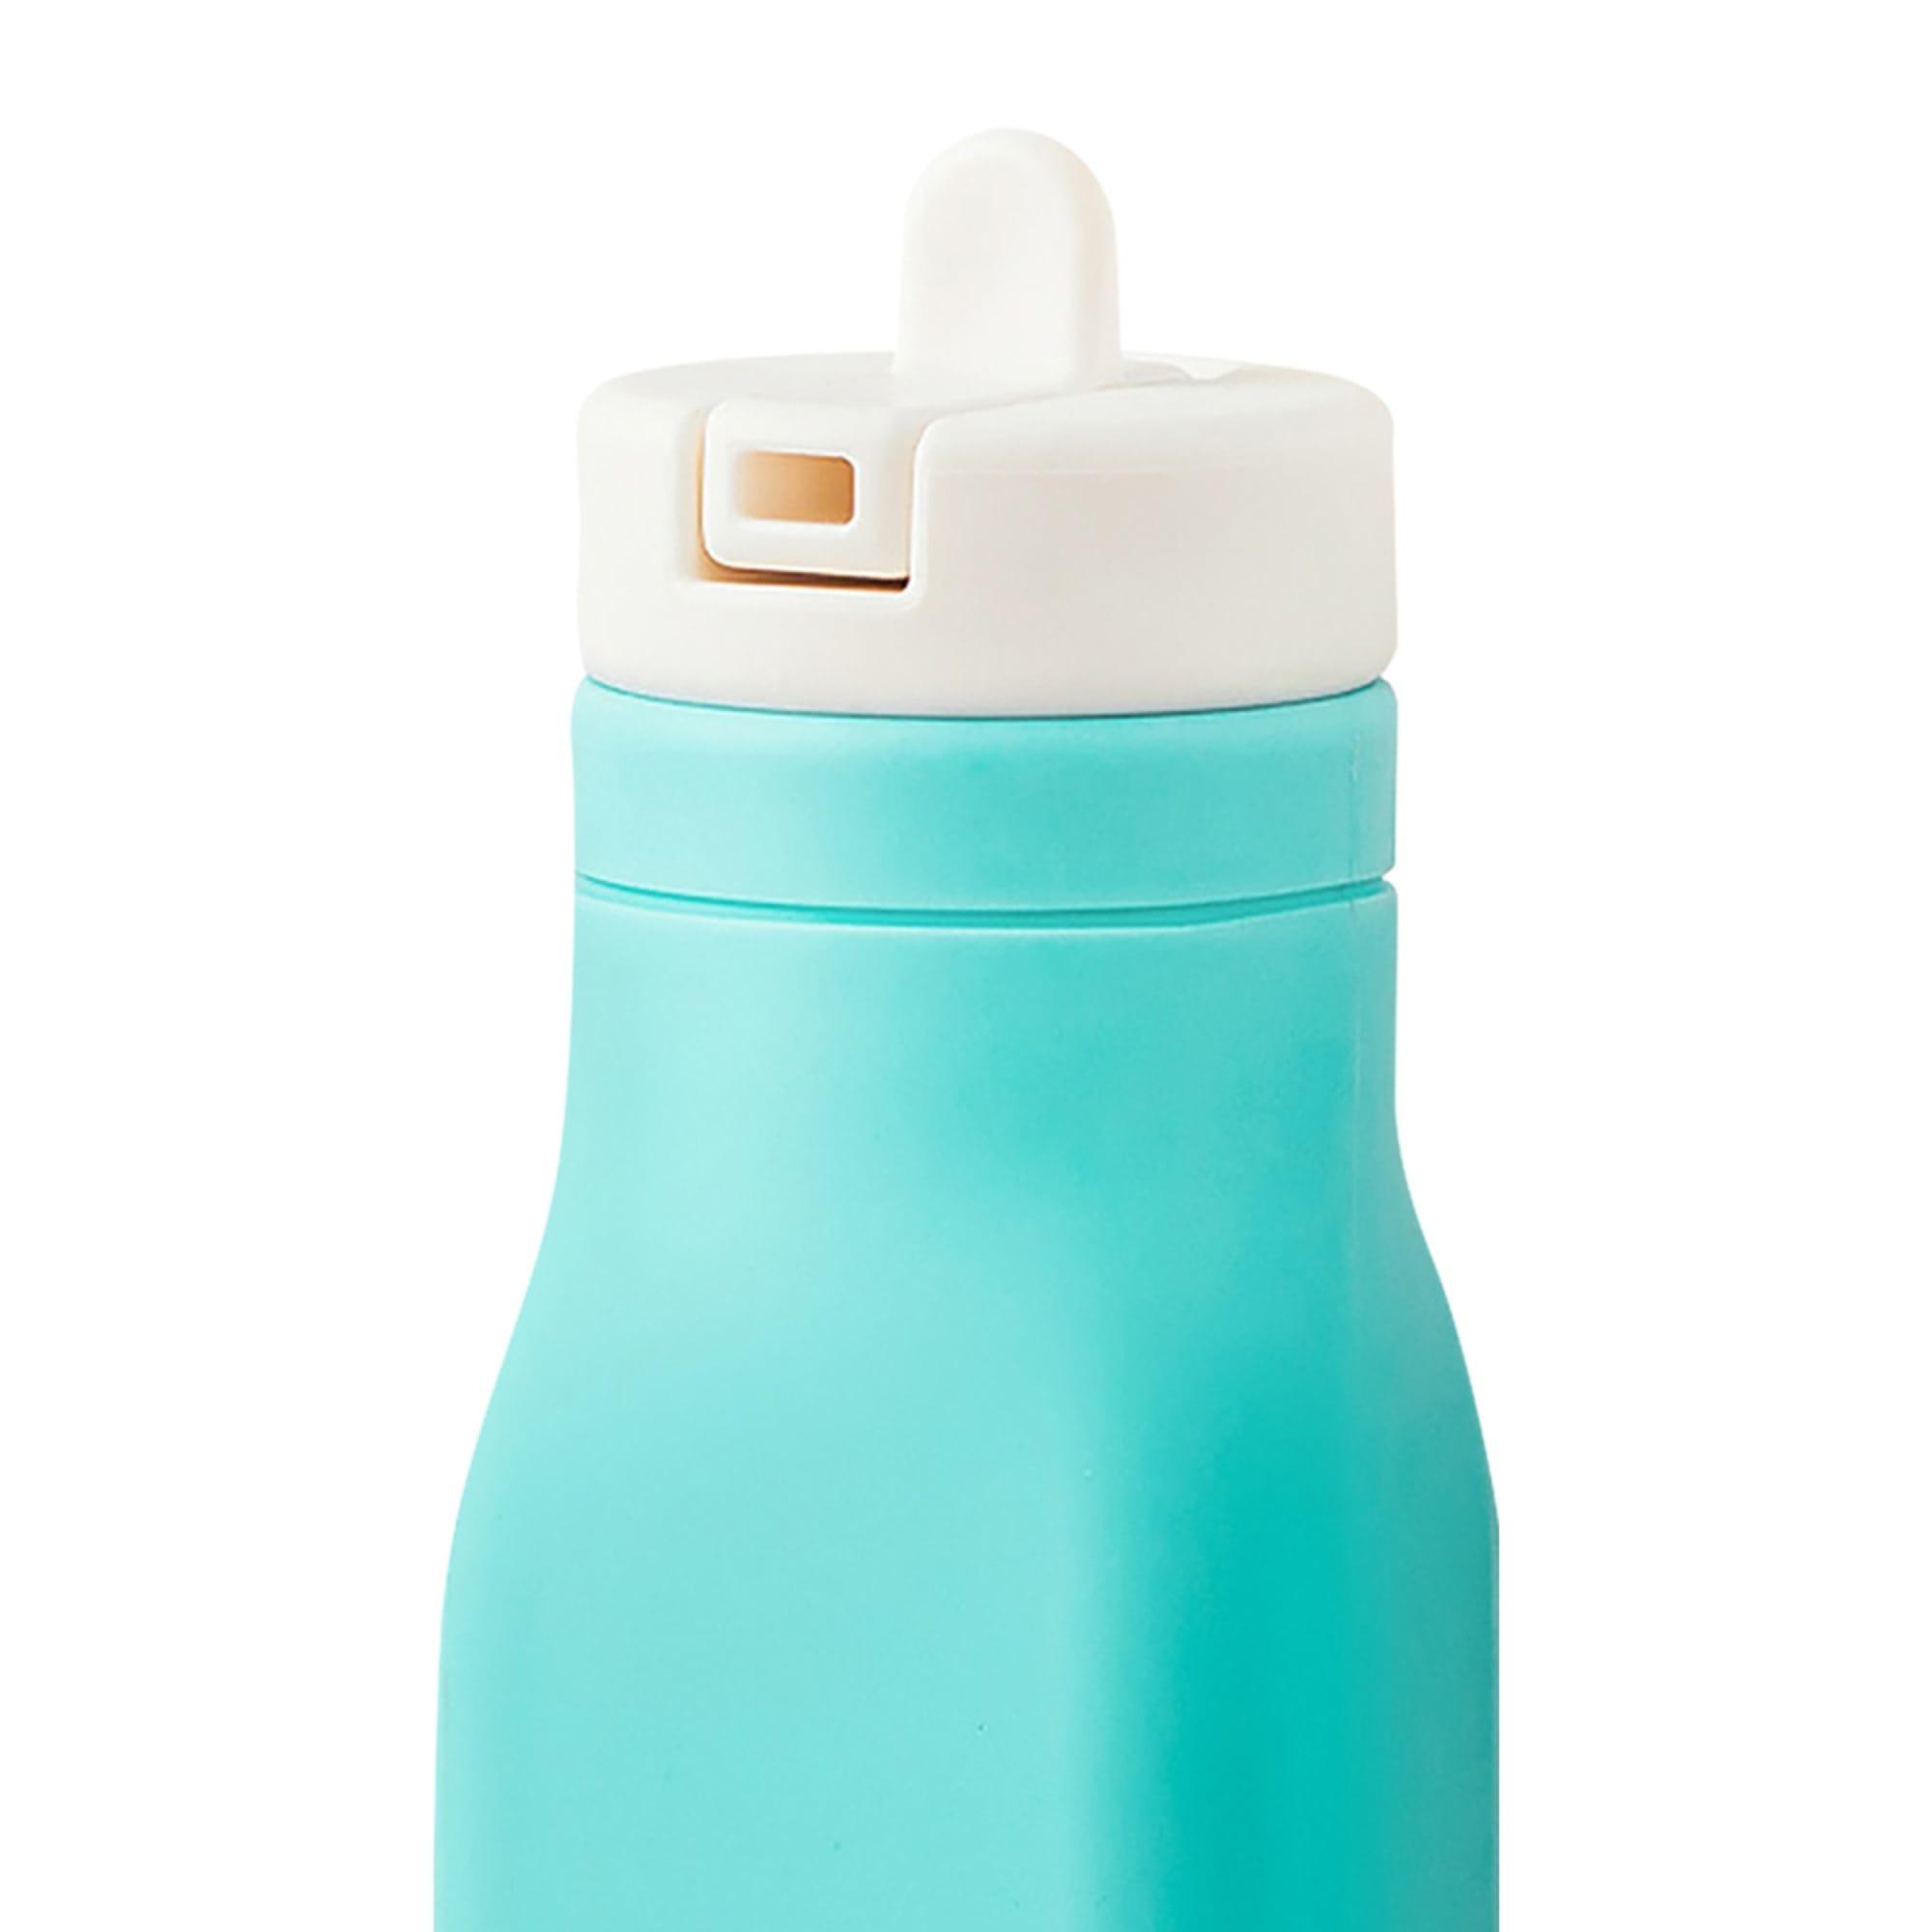 Omie Silicone Drink Bottle 250ml Teal Image 3